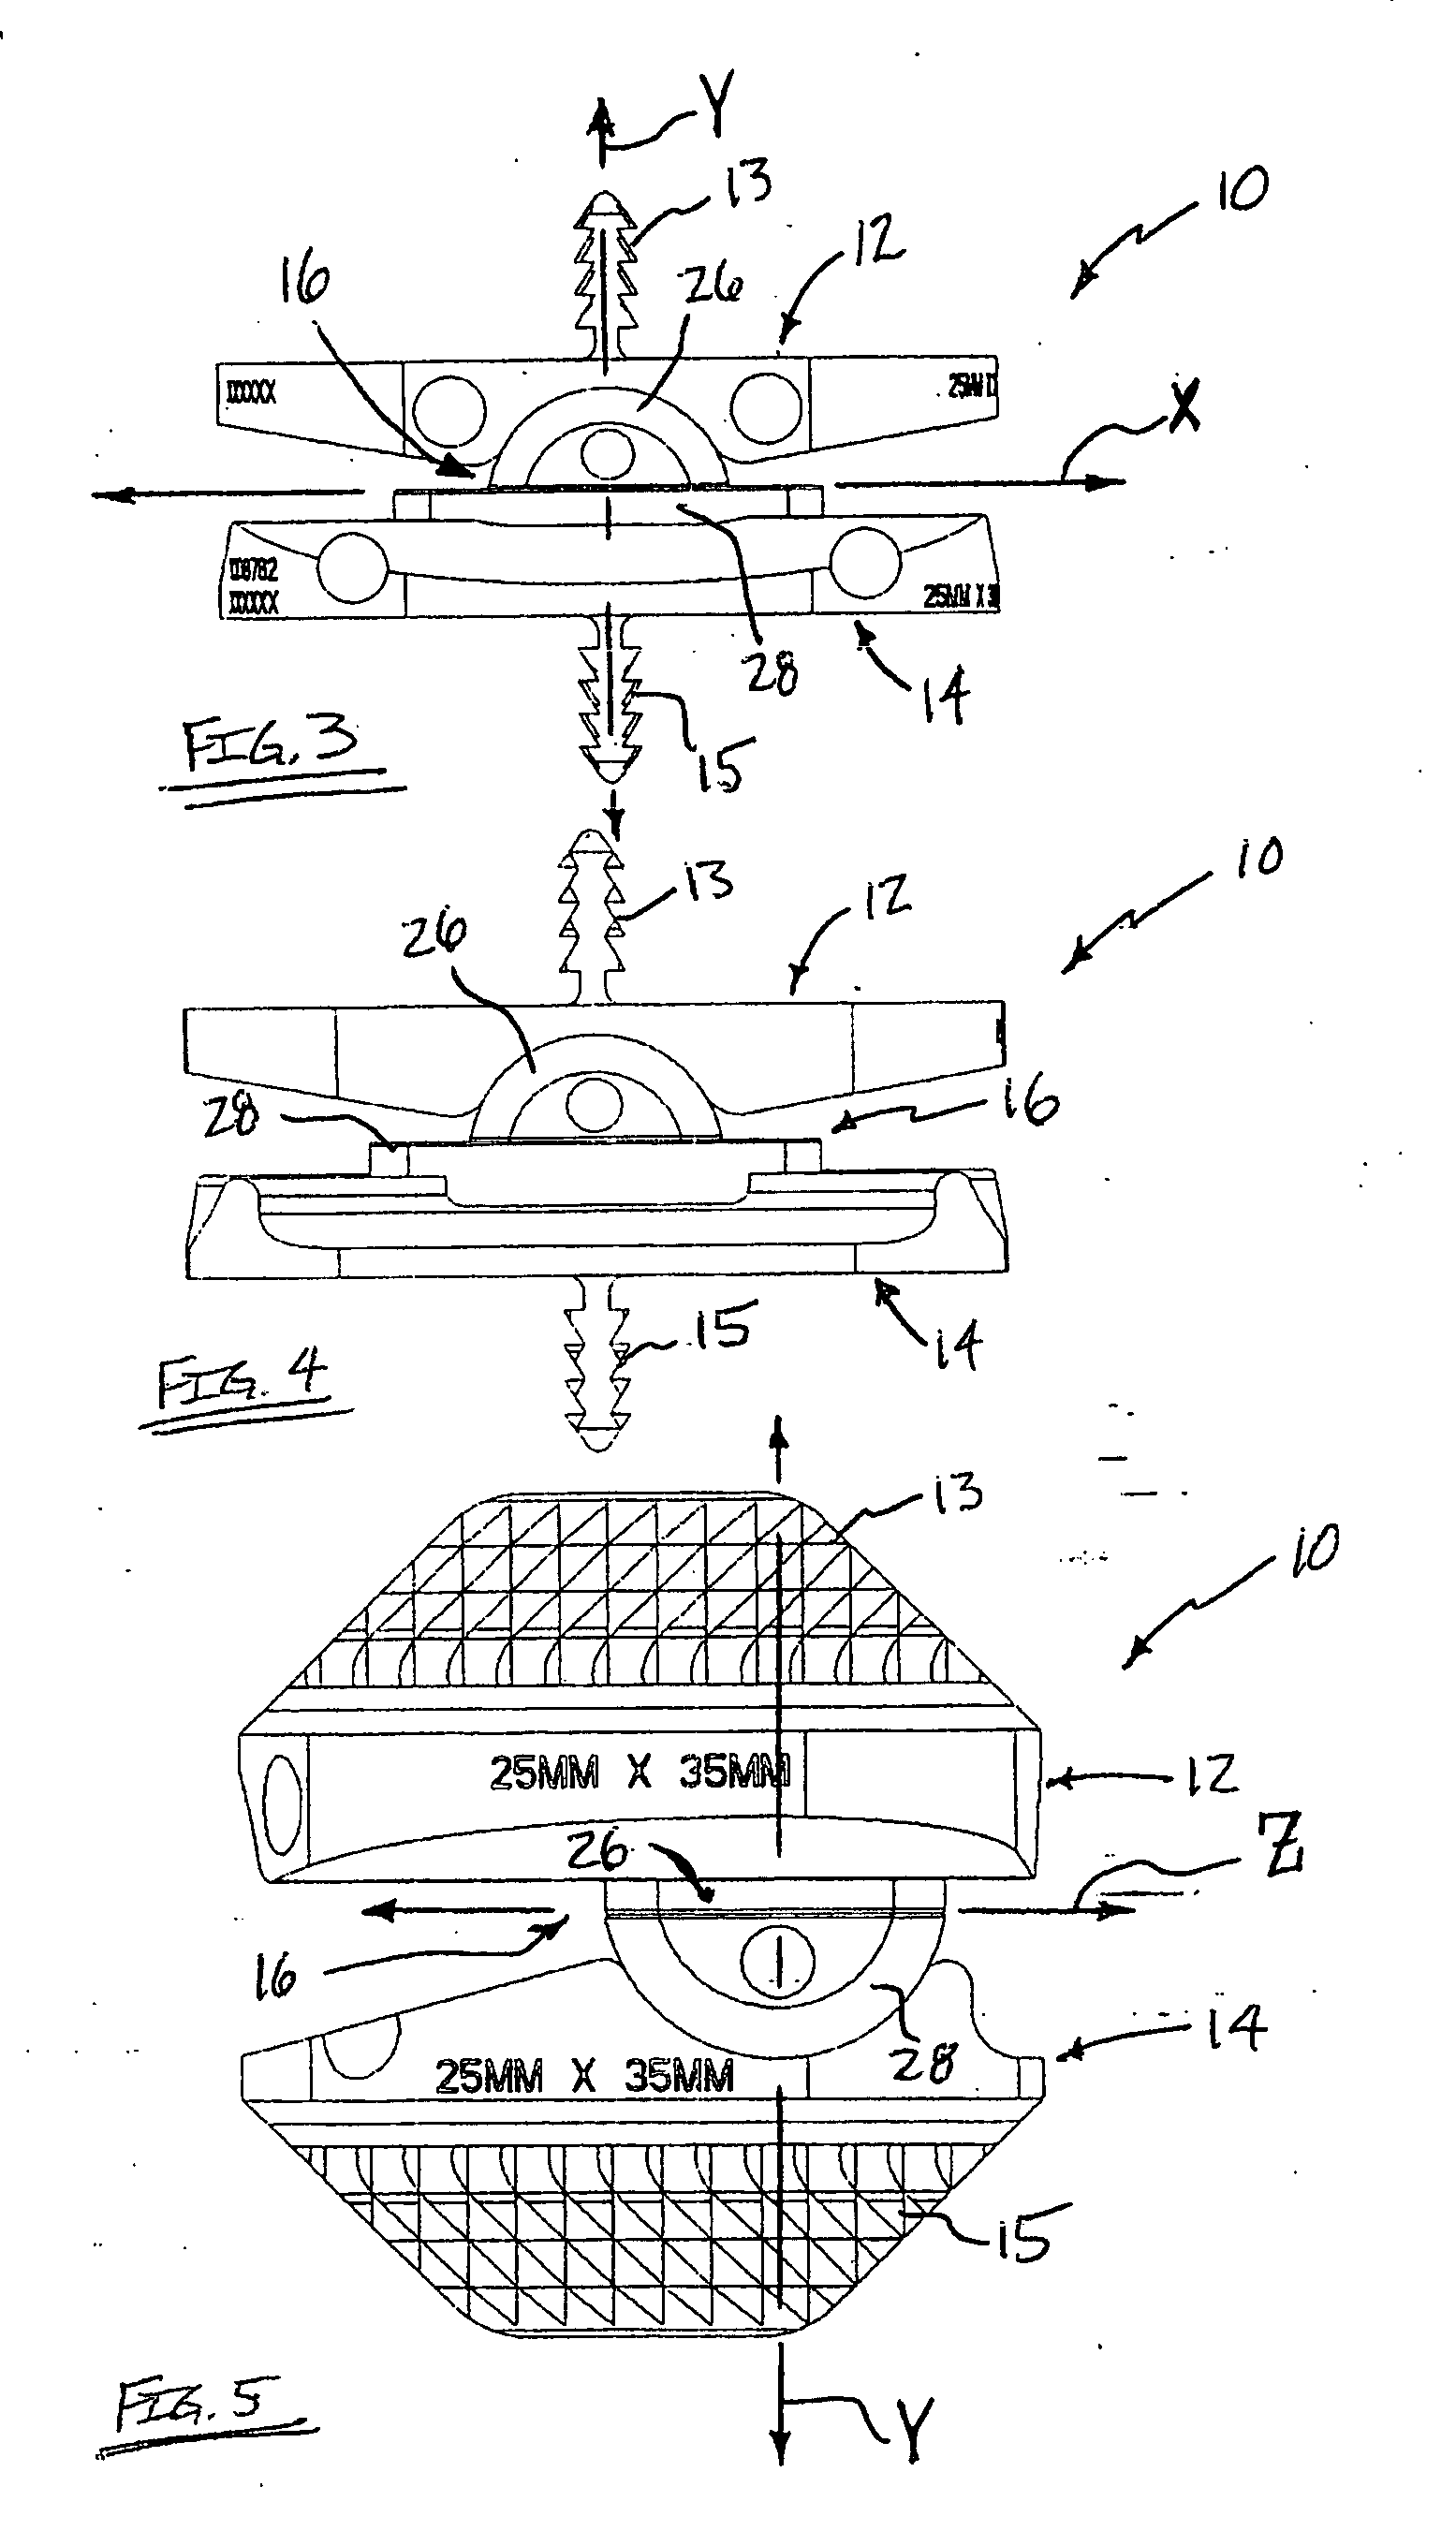 Total disc replacement system and related methods